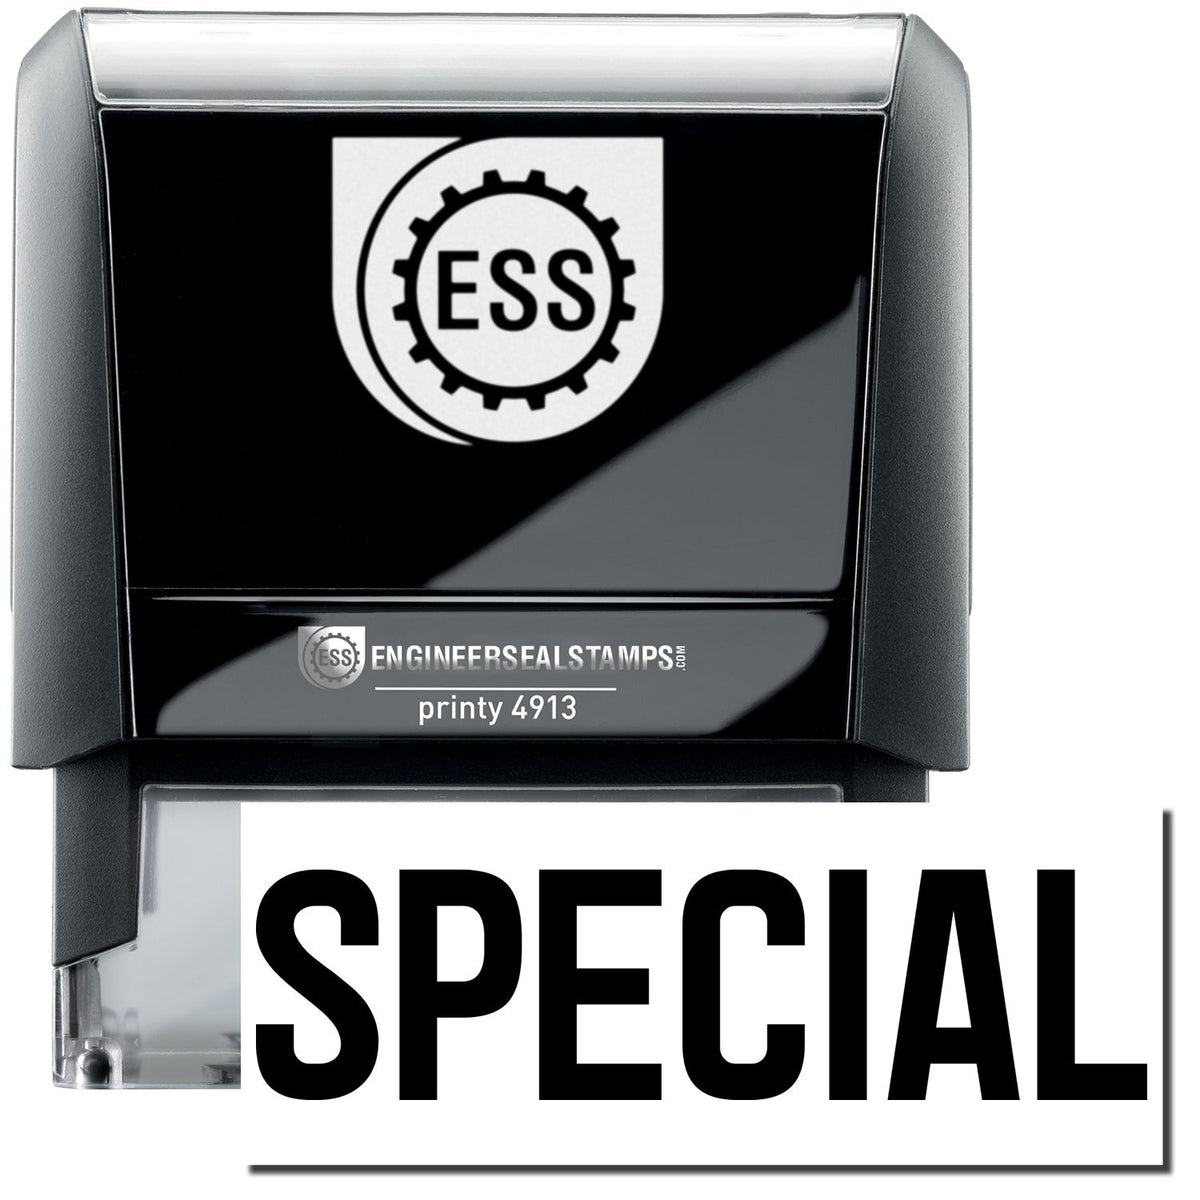 A self-inking stamp with a stamped image showing how the text &quot;SPECIAL&quot; in a large font is displayed by it after stamping.